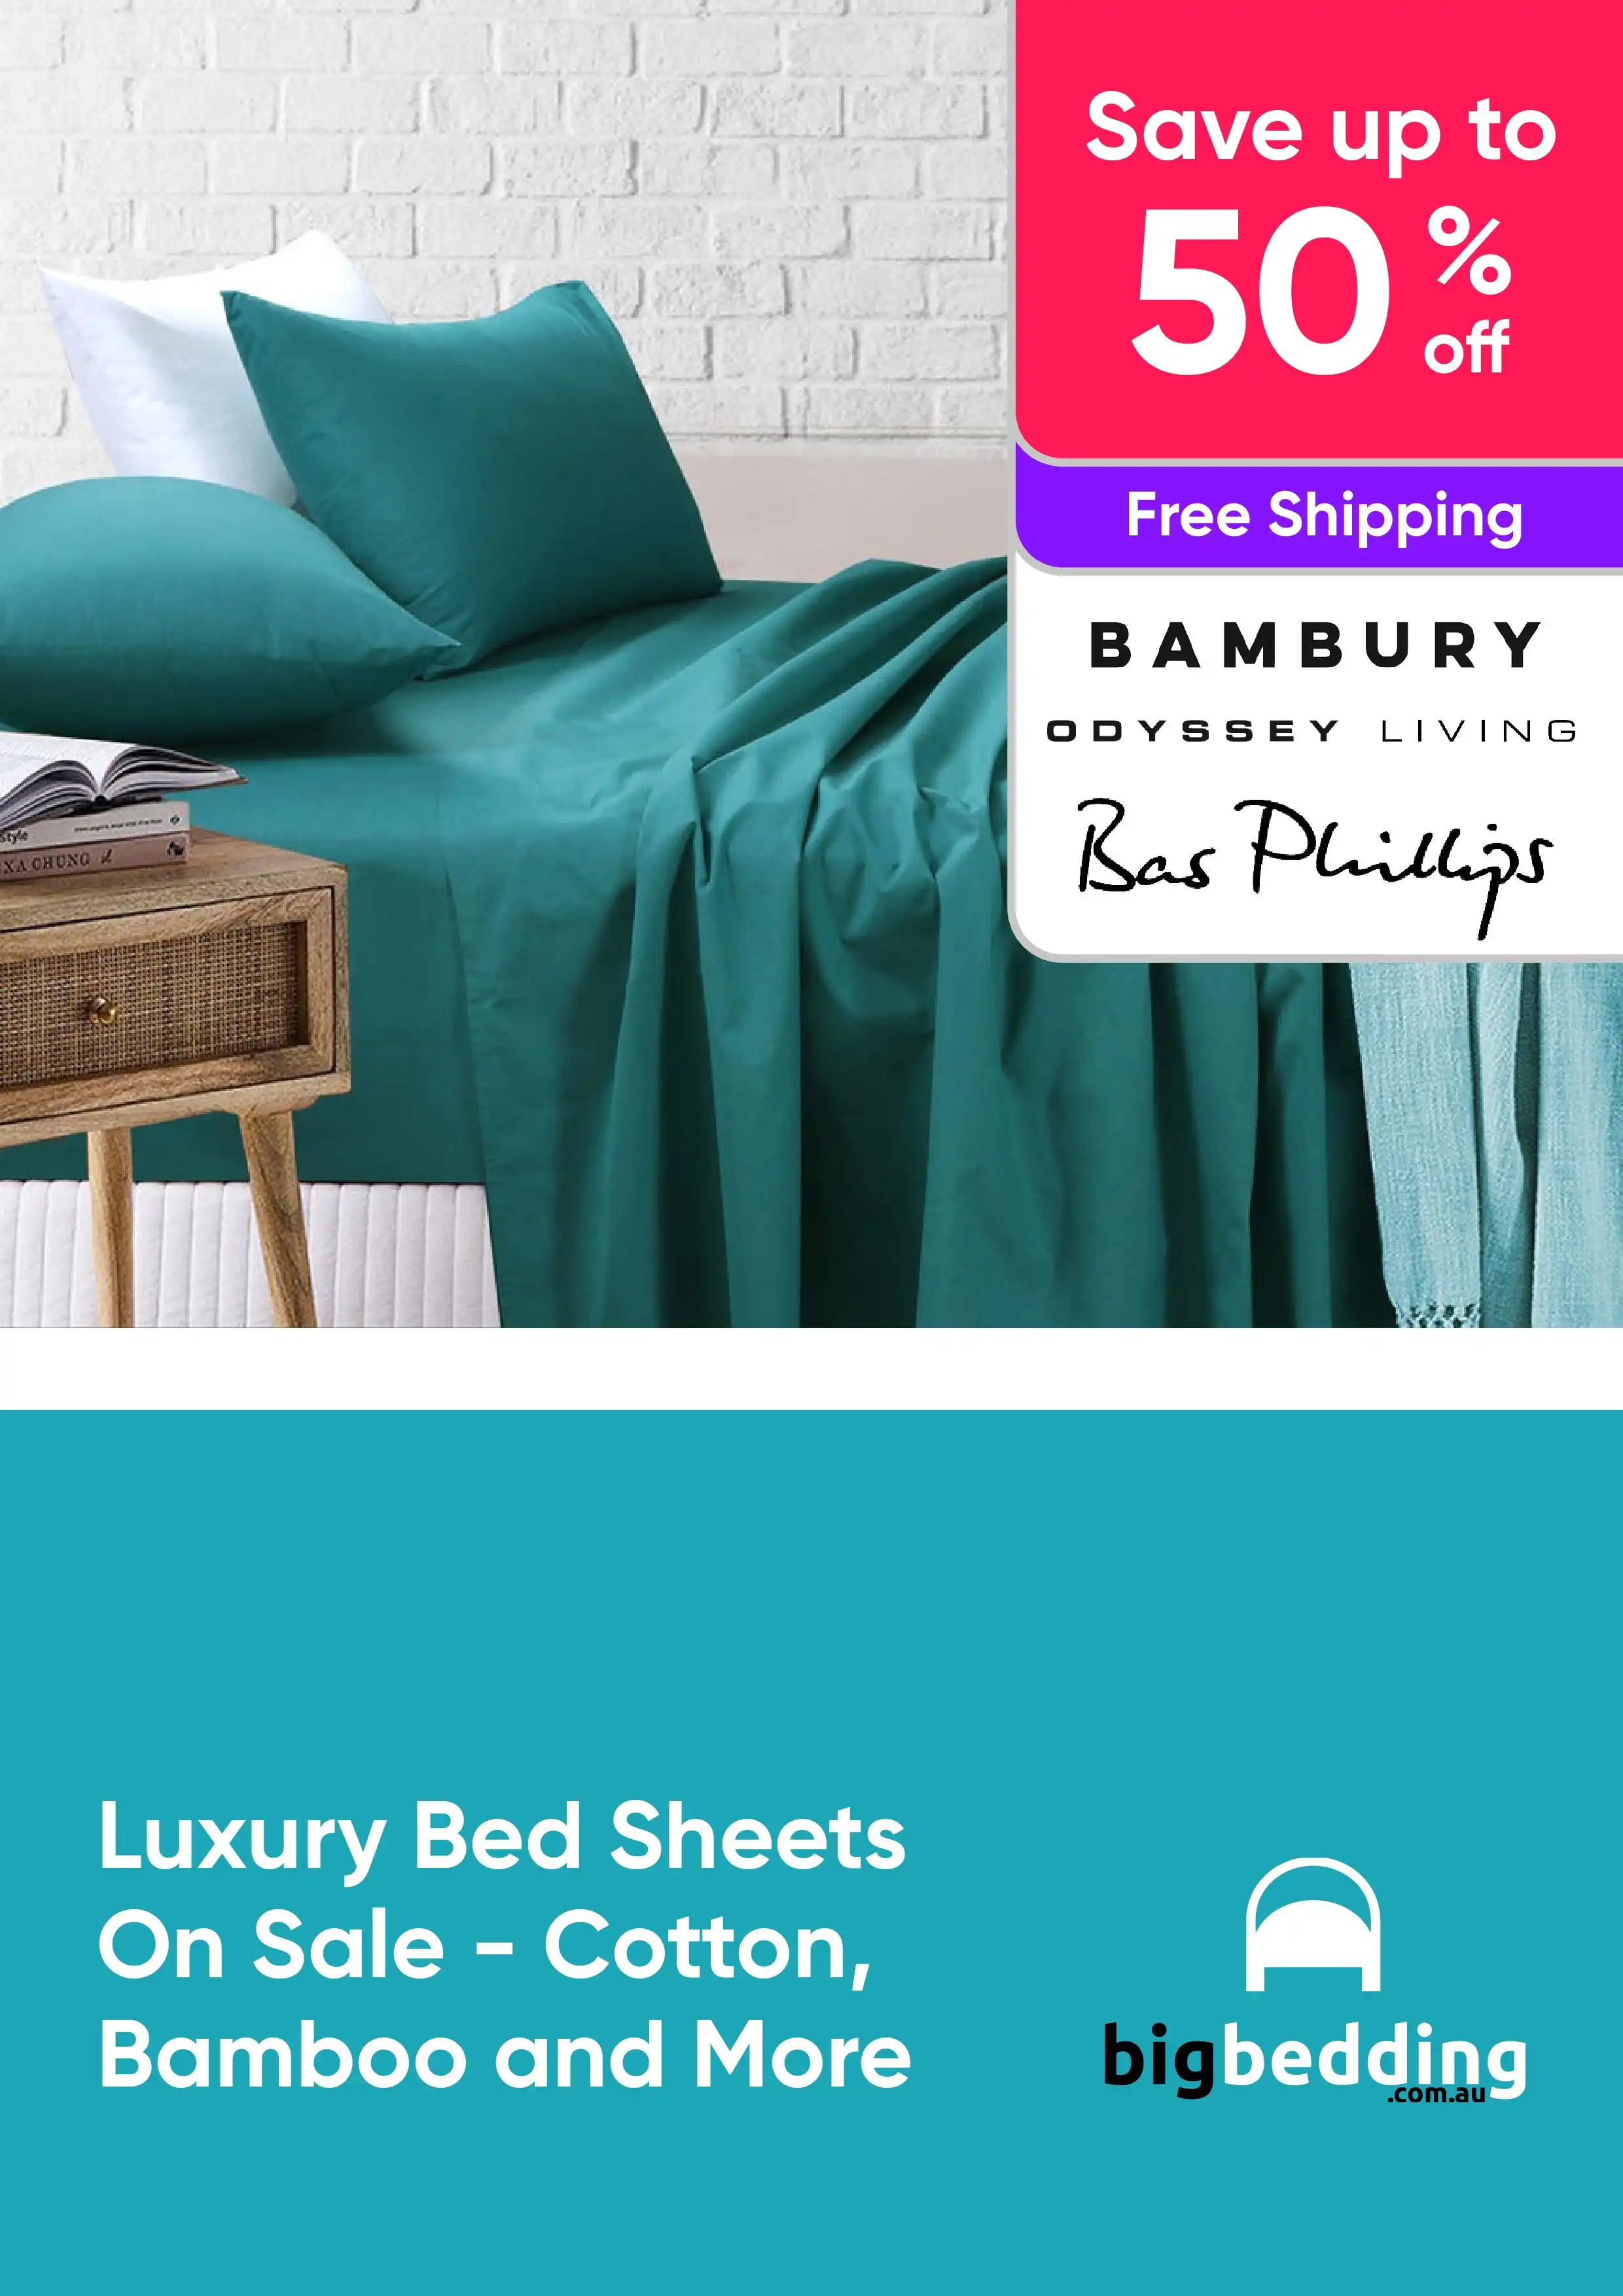 Luxury Bed Sheets On Sale - Save Up to 50% Off On a Range of Cotton, Bamboo